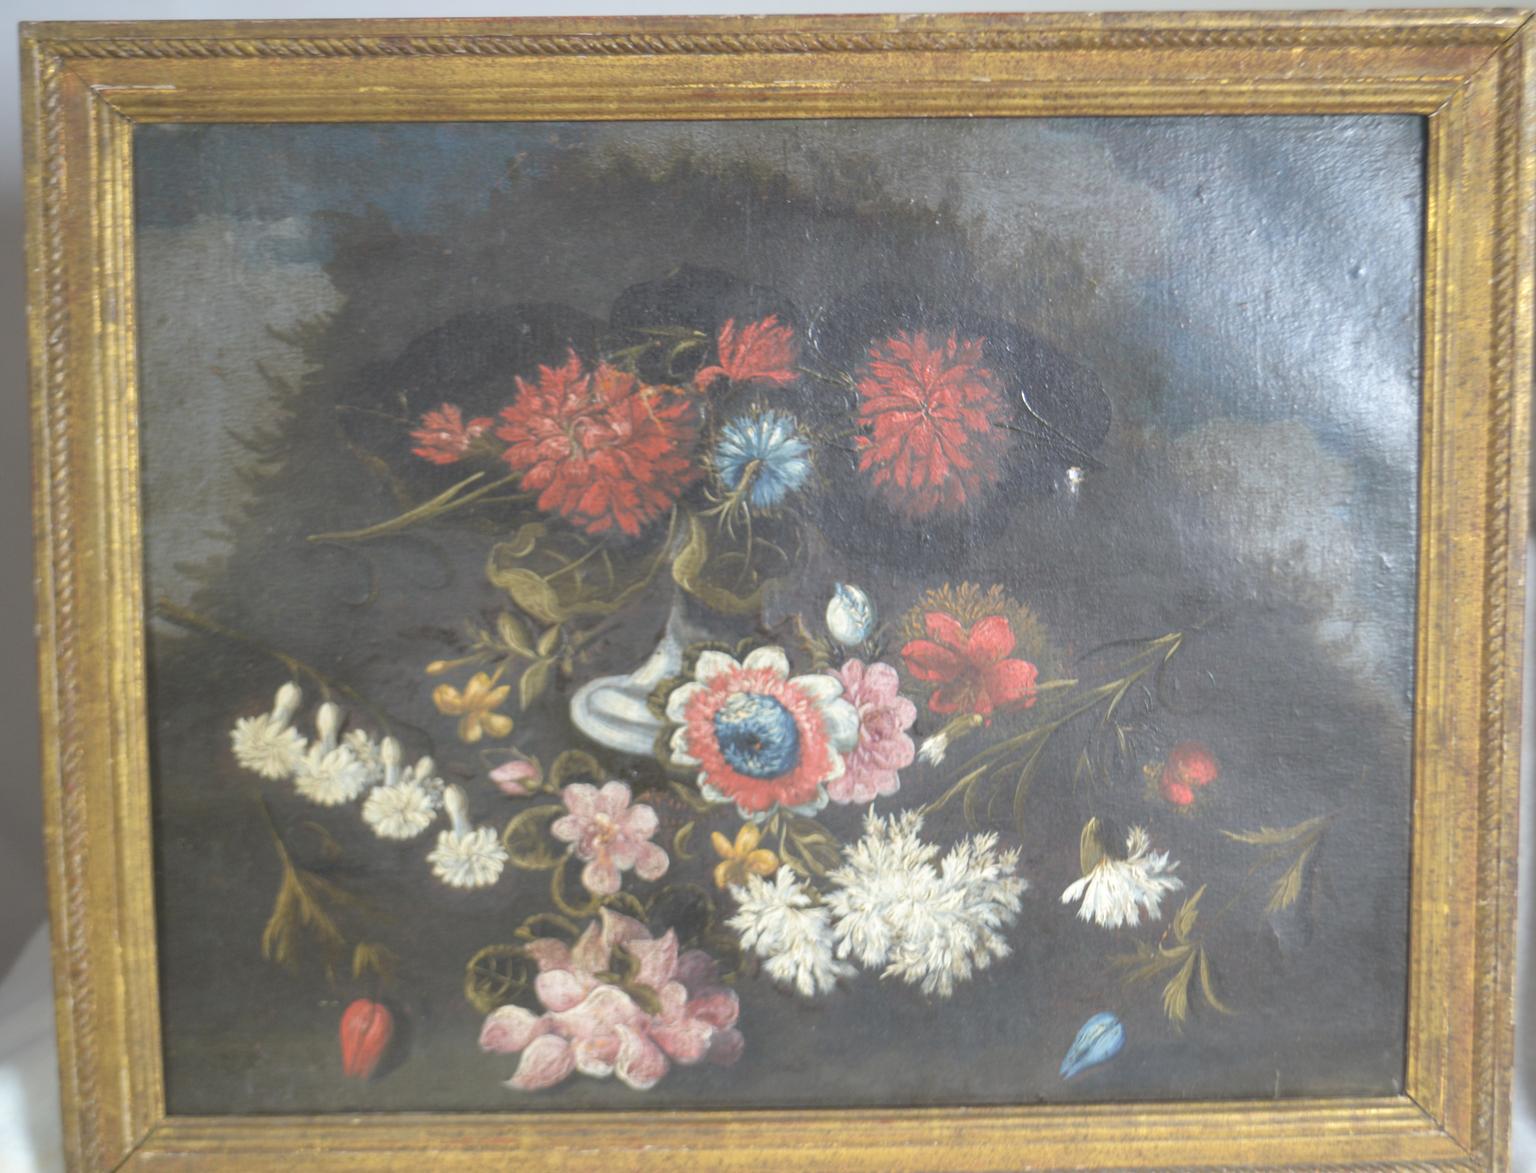 Continental School (19th century), a pair of decorative oils on canvas depicting various wildflowers in a landscape, 15